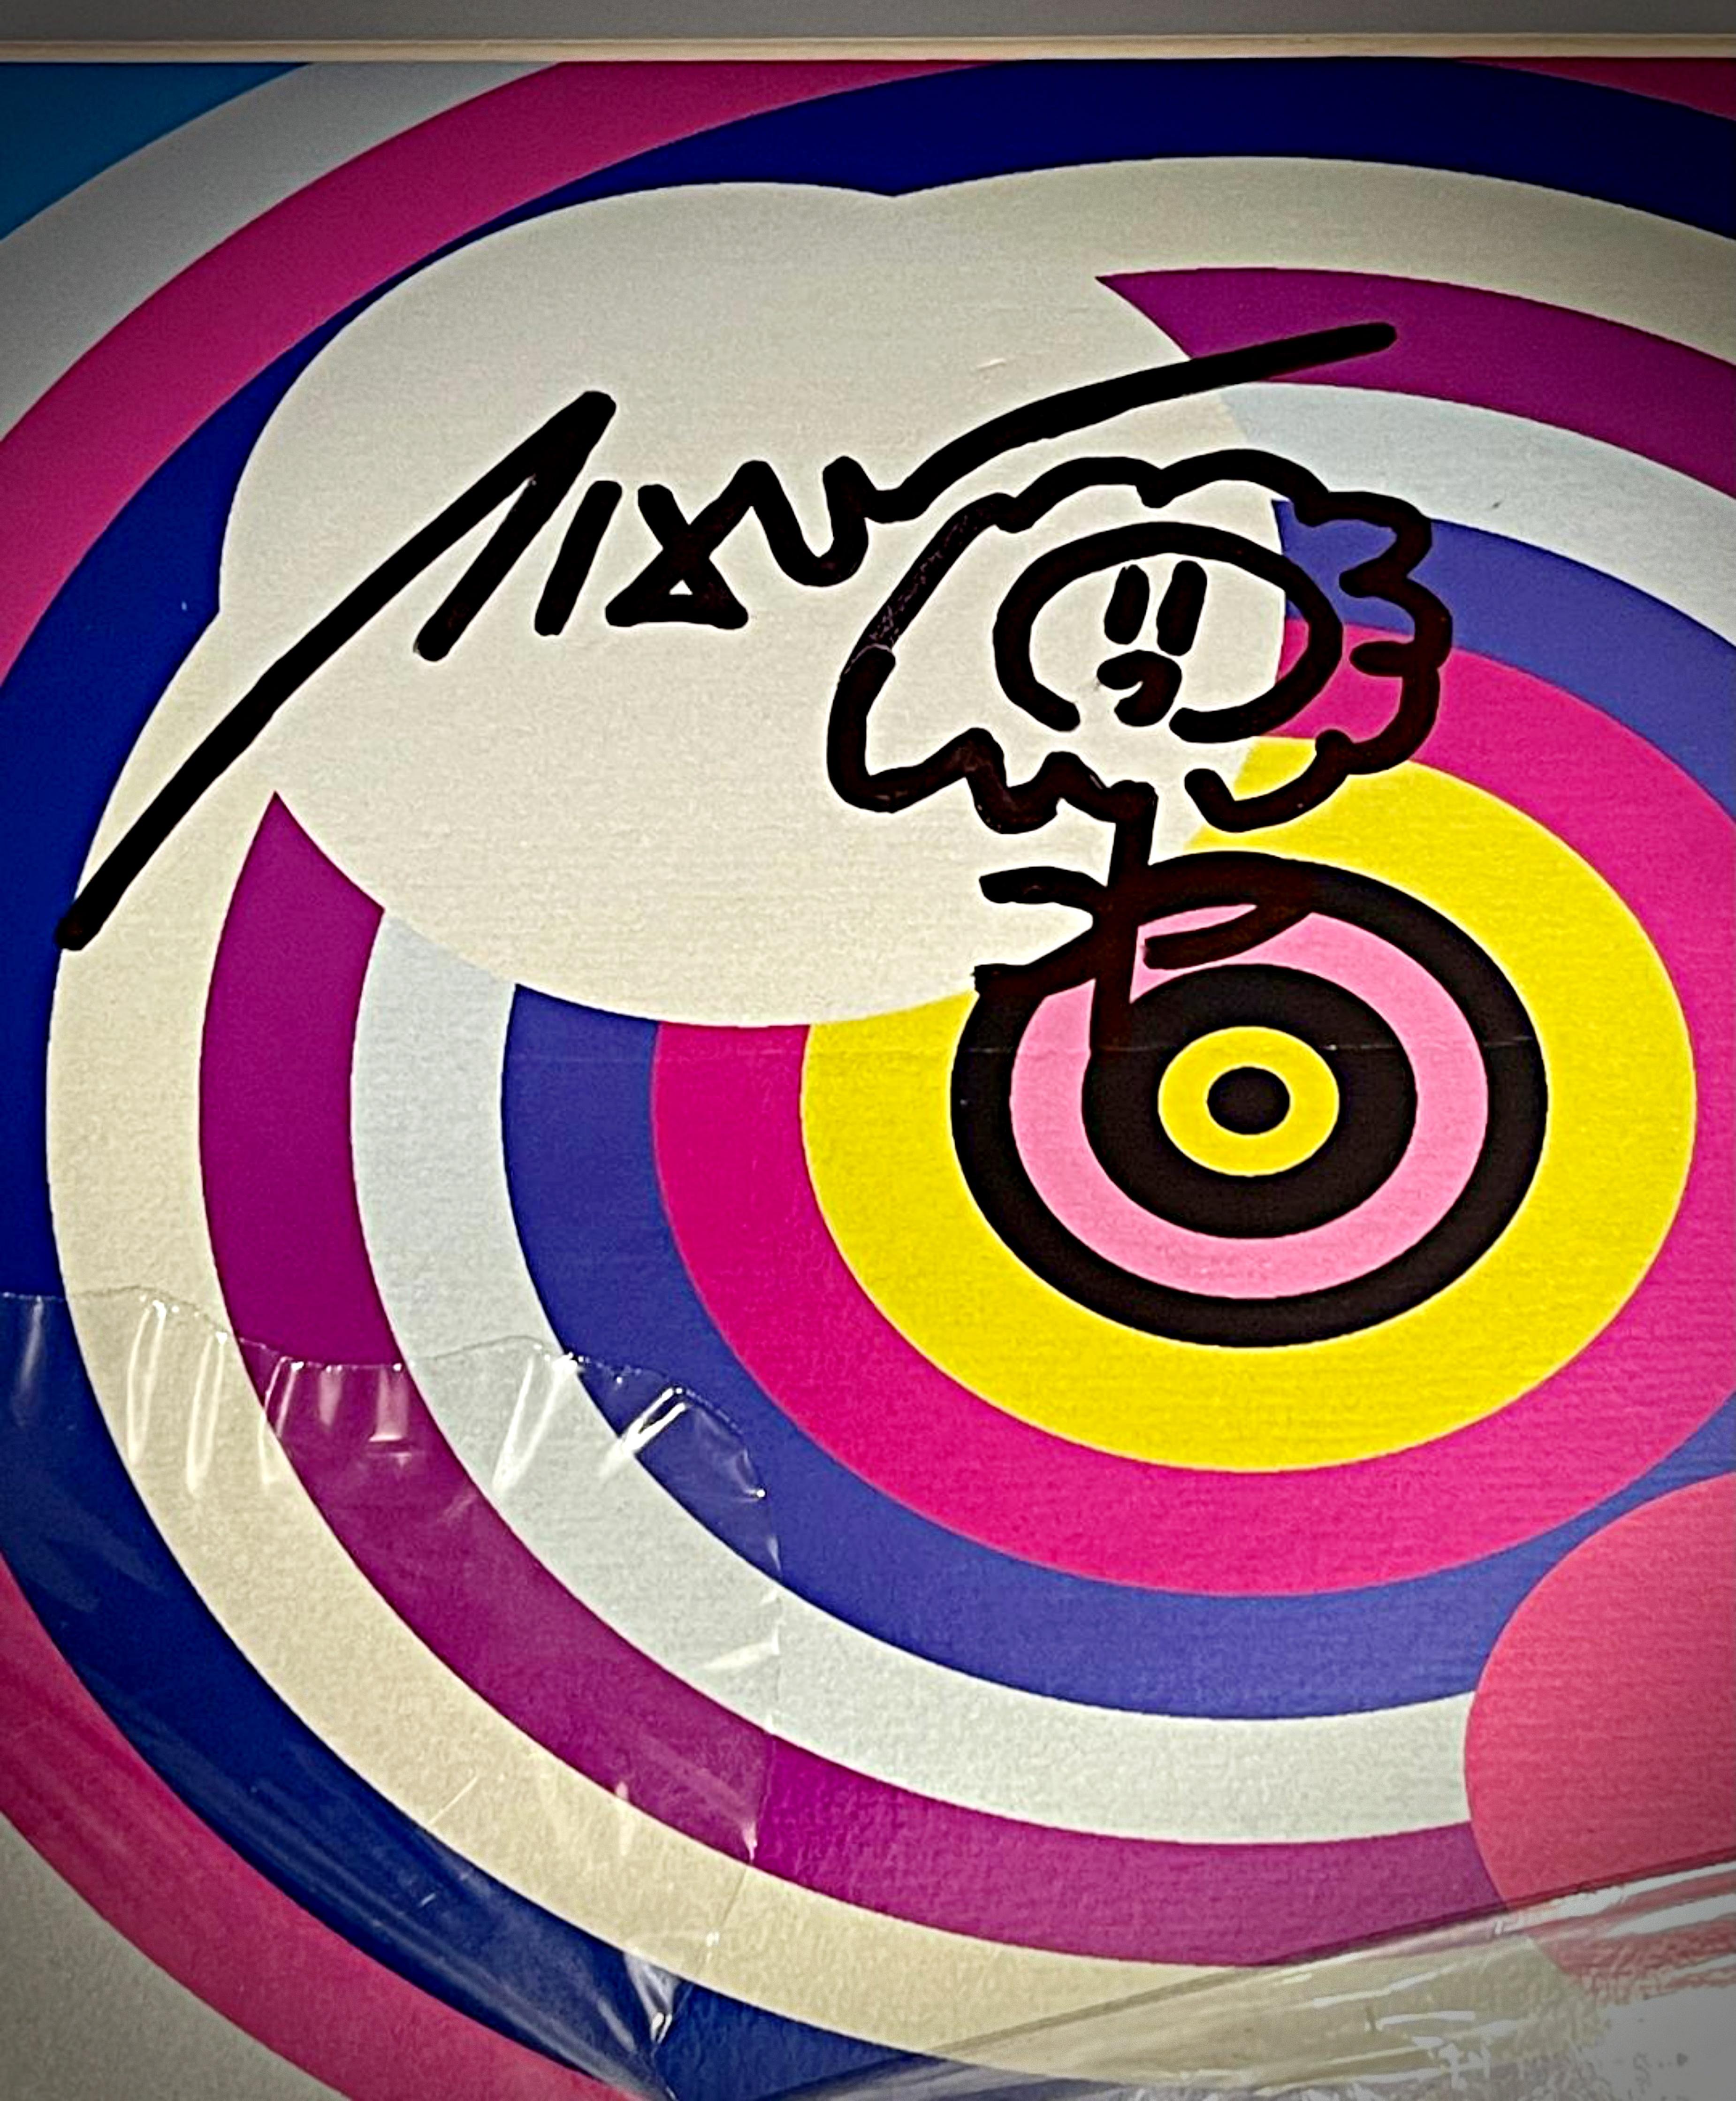 TAKASHI MURAKAMI
Original Flower Drawing on skateboard (Hand signed), 2017
Unique Flower Drawing in Marker on skateboard. Signed by Murakami
31 × 8 inches
 Flower drawing done in marker and boldly signed by Murakami.
The skate deck was issued